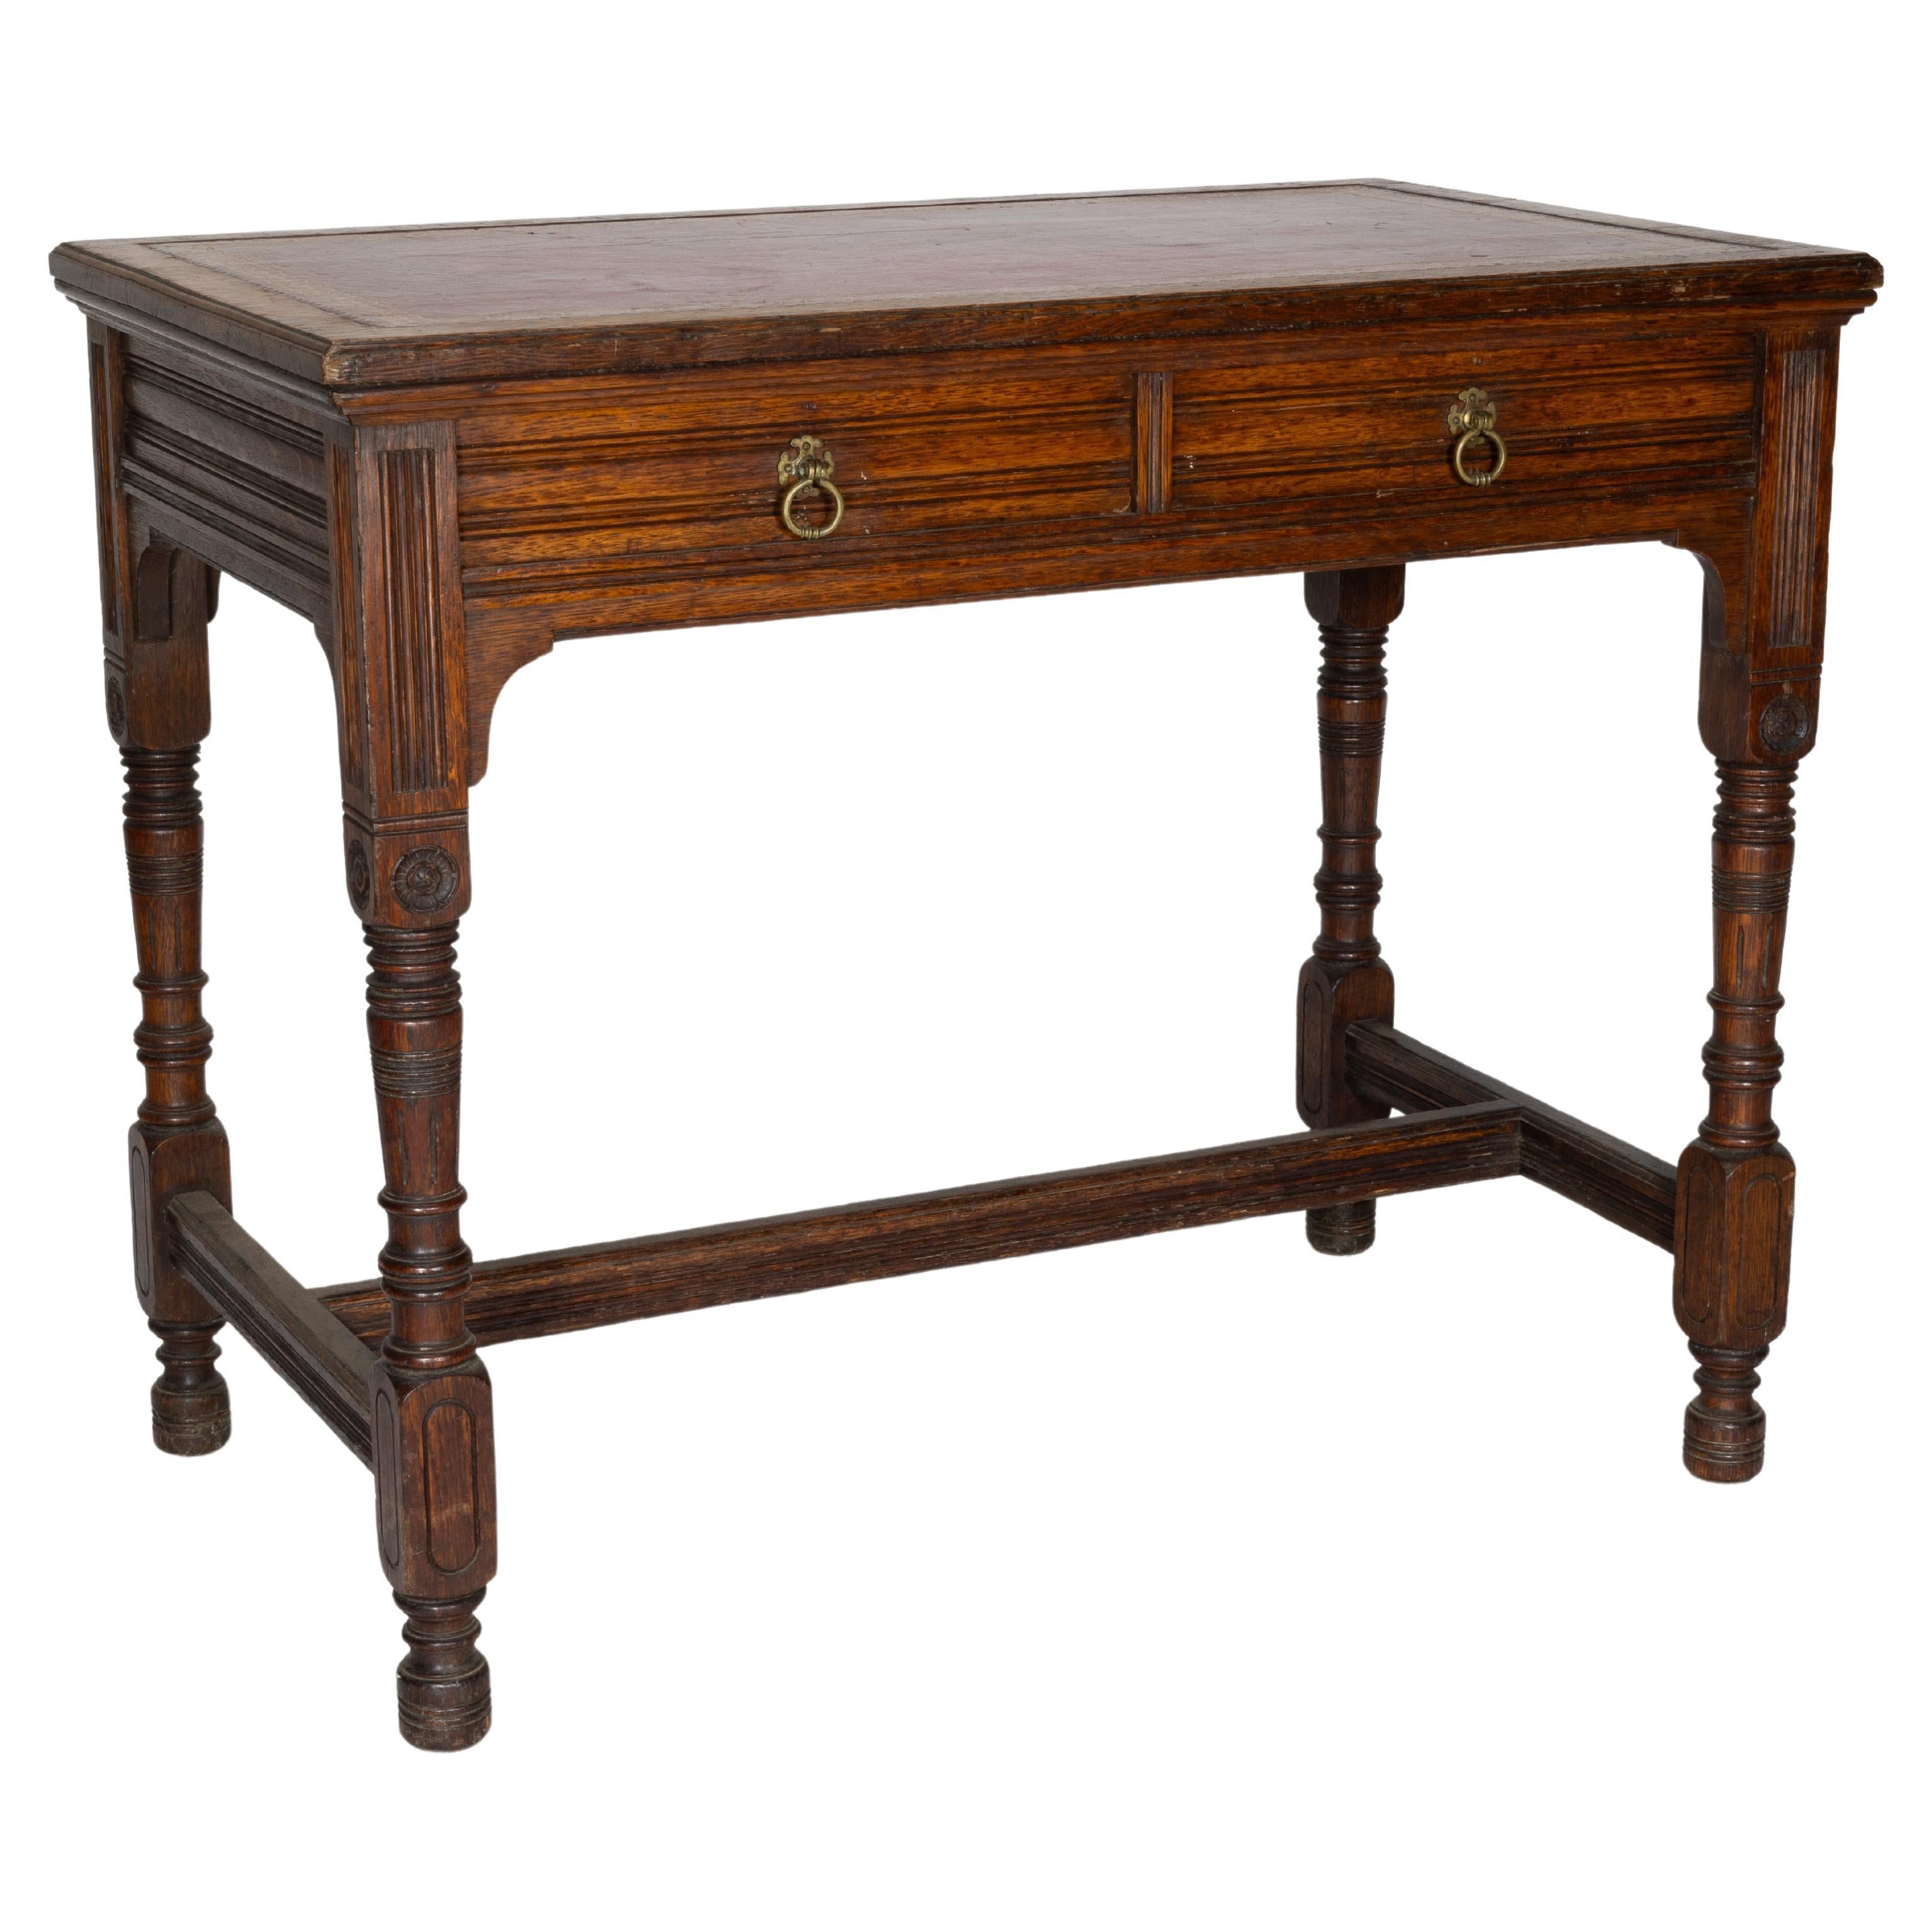 Bruce Talbert for Gillow and Co. A Gothic Revival Oak and Leather Writing Table